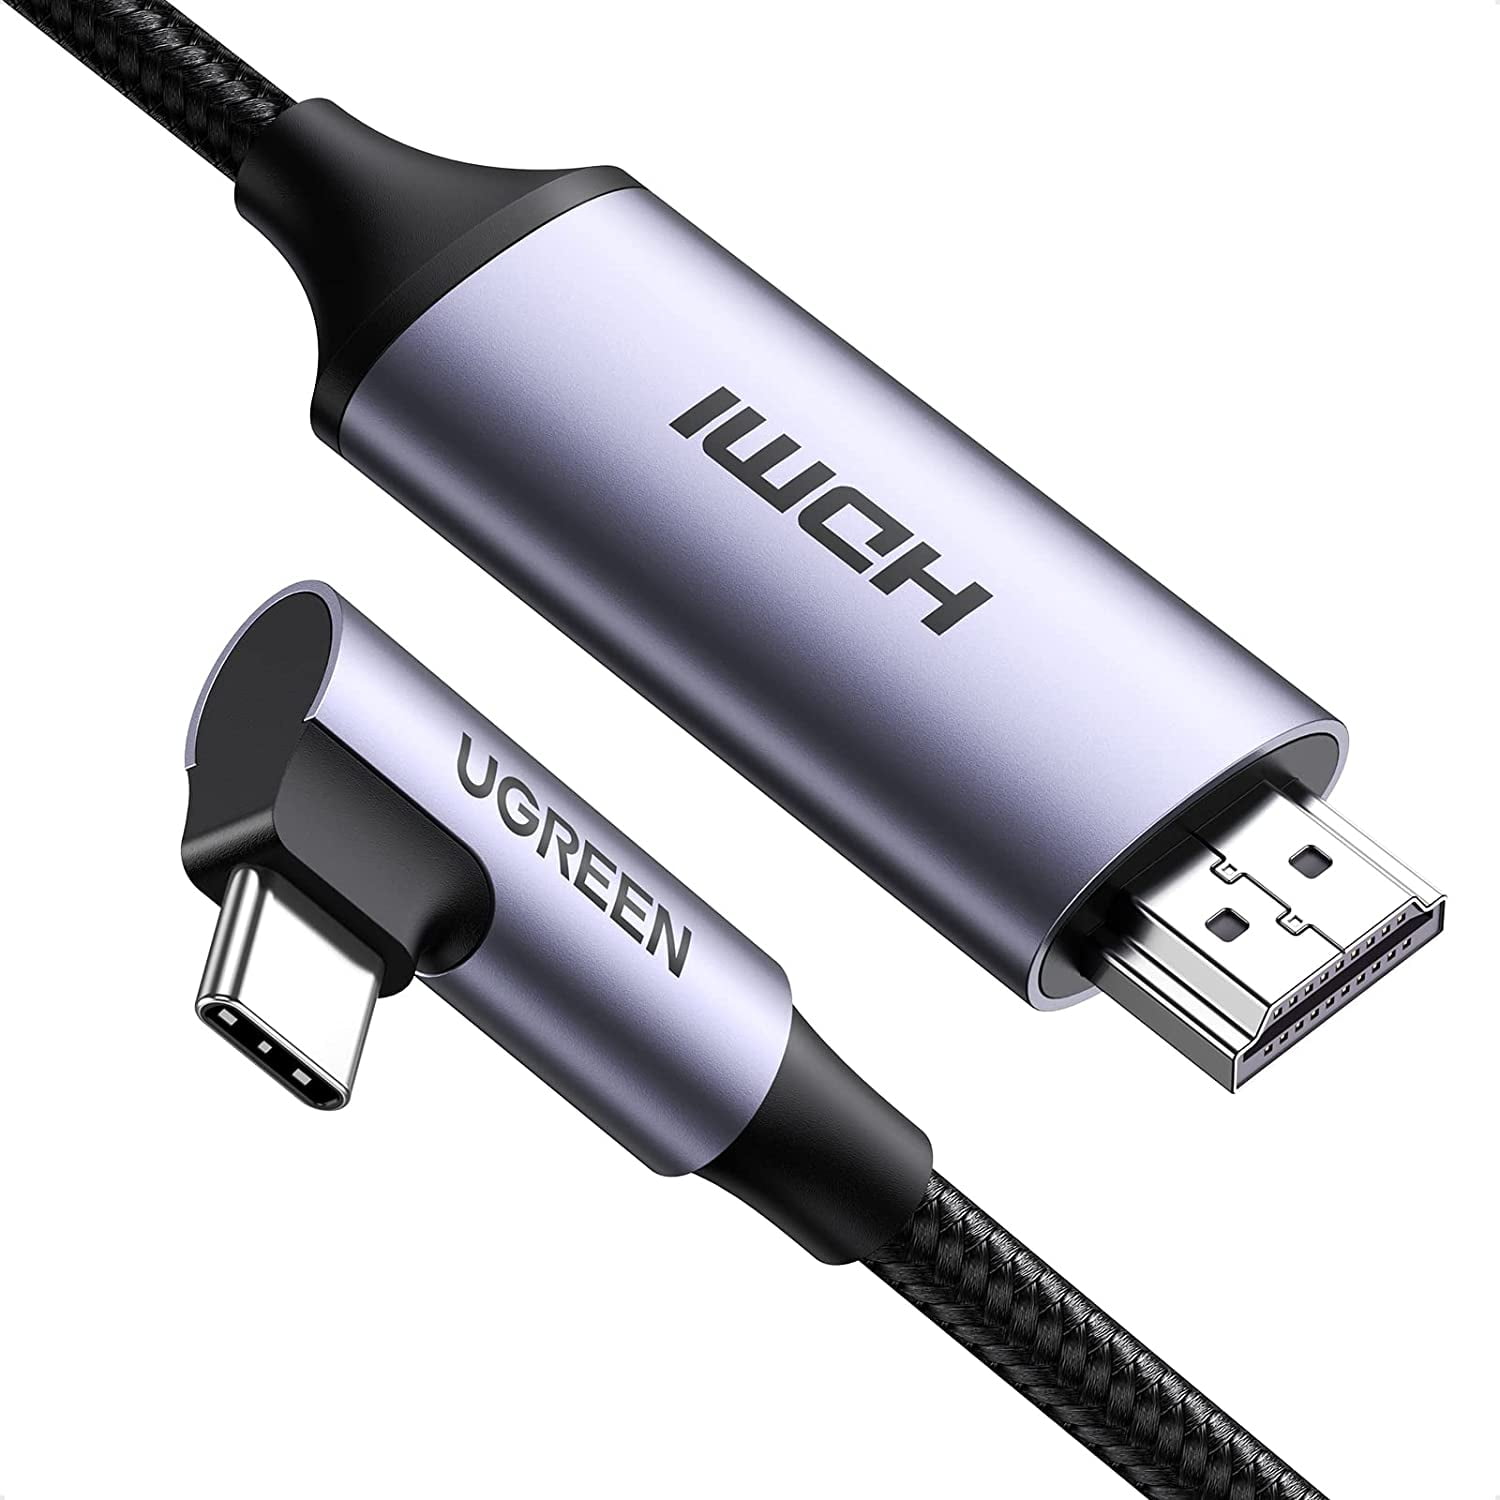 whisky biord kalligrafi 4K 60Hz USB C to HDMI Cable Right Angle 4K USB Type C HDMI Adapter Cable to  Connect Laptop to Monitor Thunderbolt 3 Compatible for iPad Mini 6, MacBook  Pro, Samsung Note